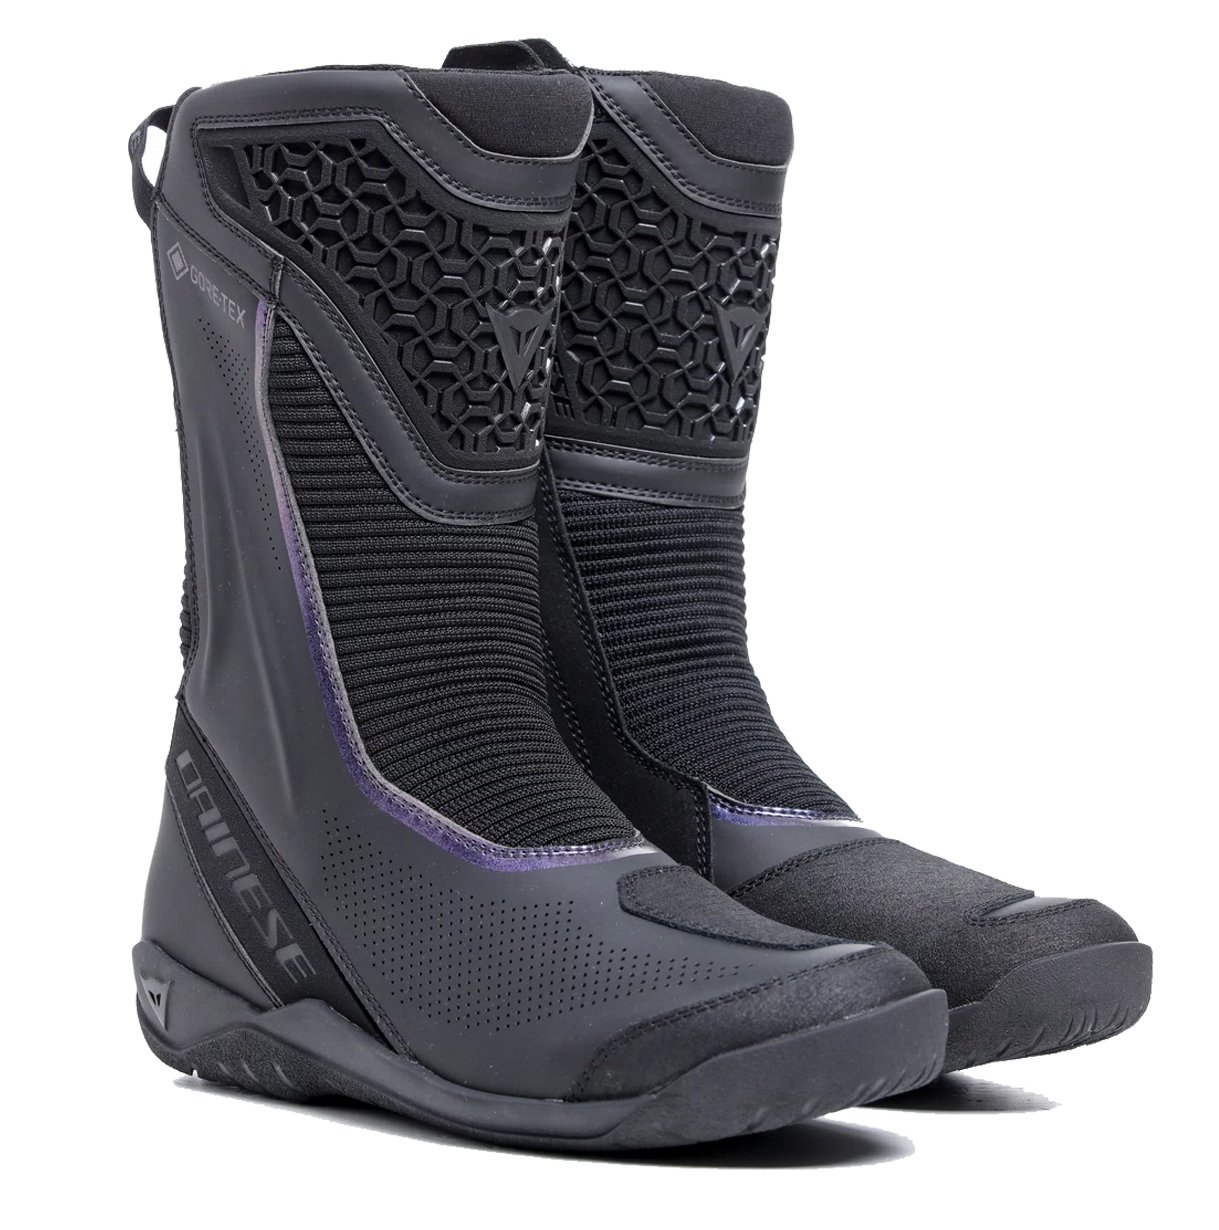 Image of Dainese Freeland 2 Gore-Tex Boots Wmn Black Size 40 ID 8051019693136